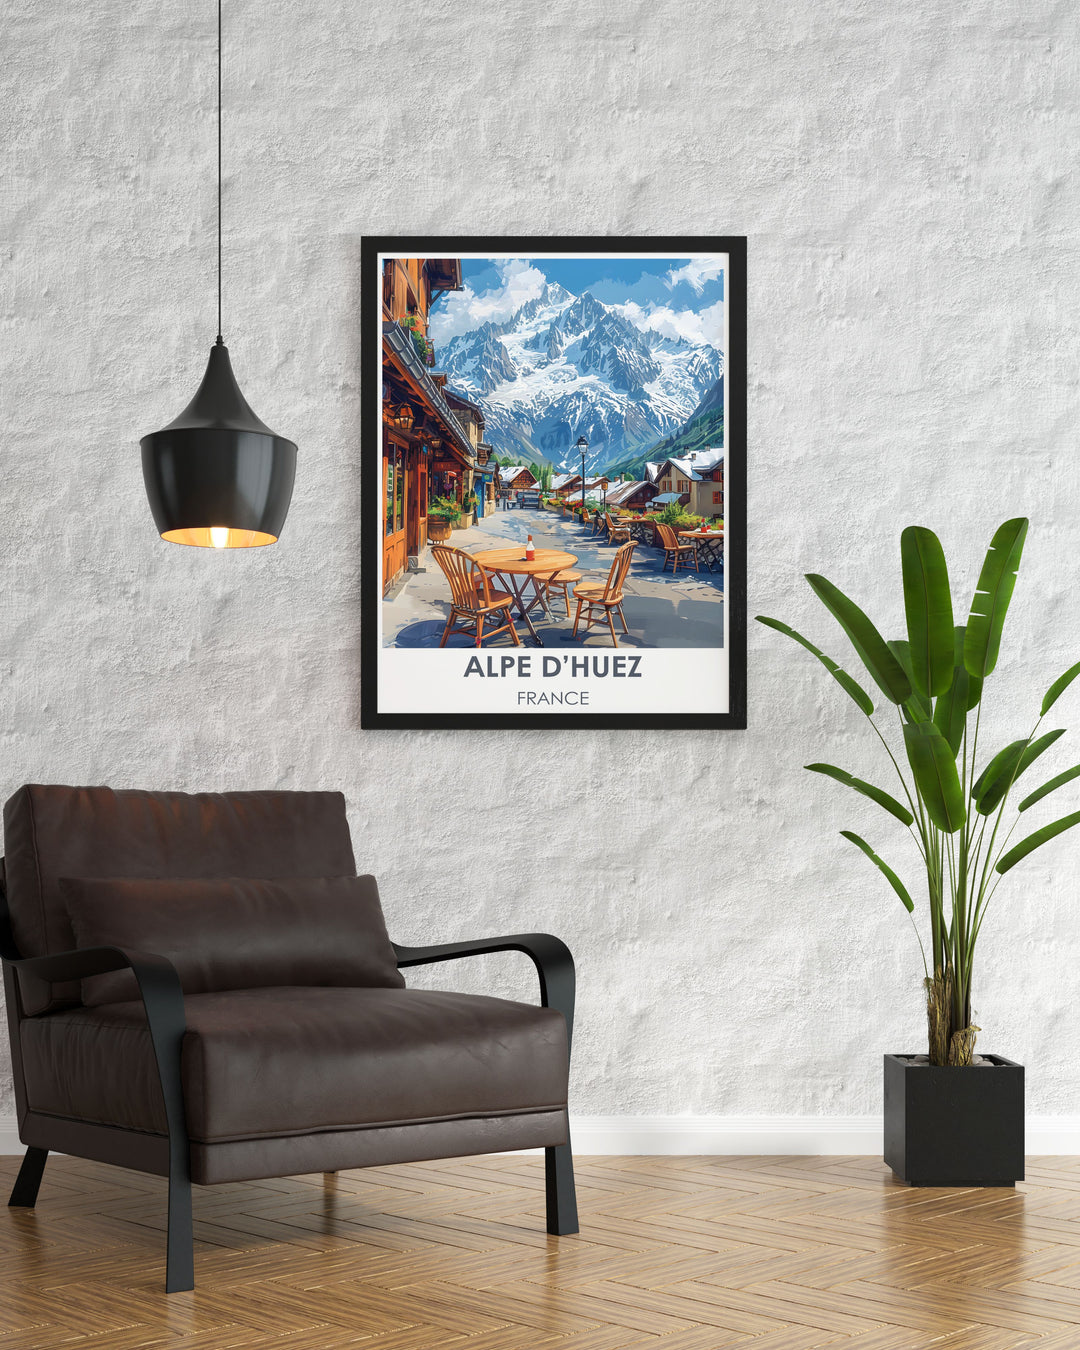 Custom ski print featuring a panoramic view of LAlpe dHuez Village, ideal for personalizing with your ski trip memories.